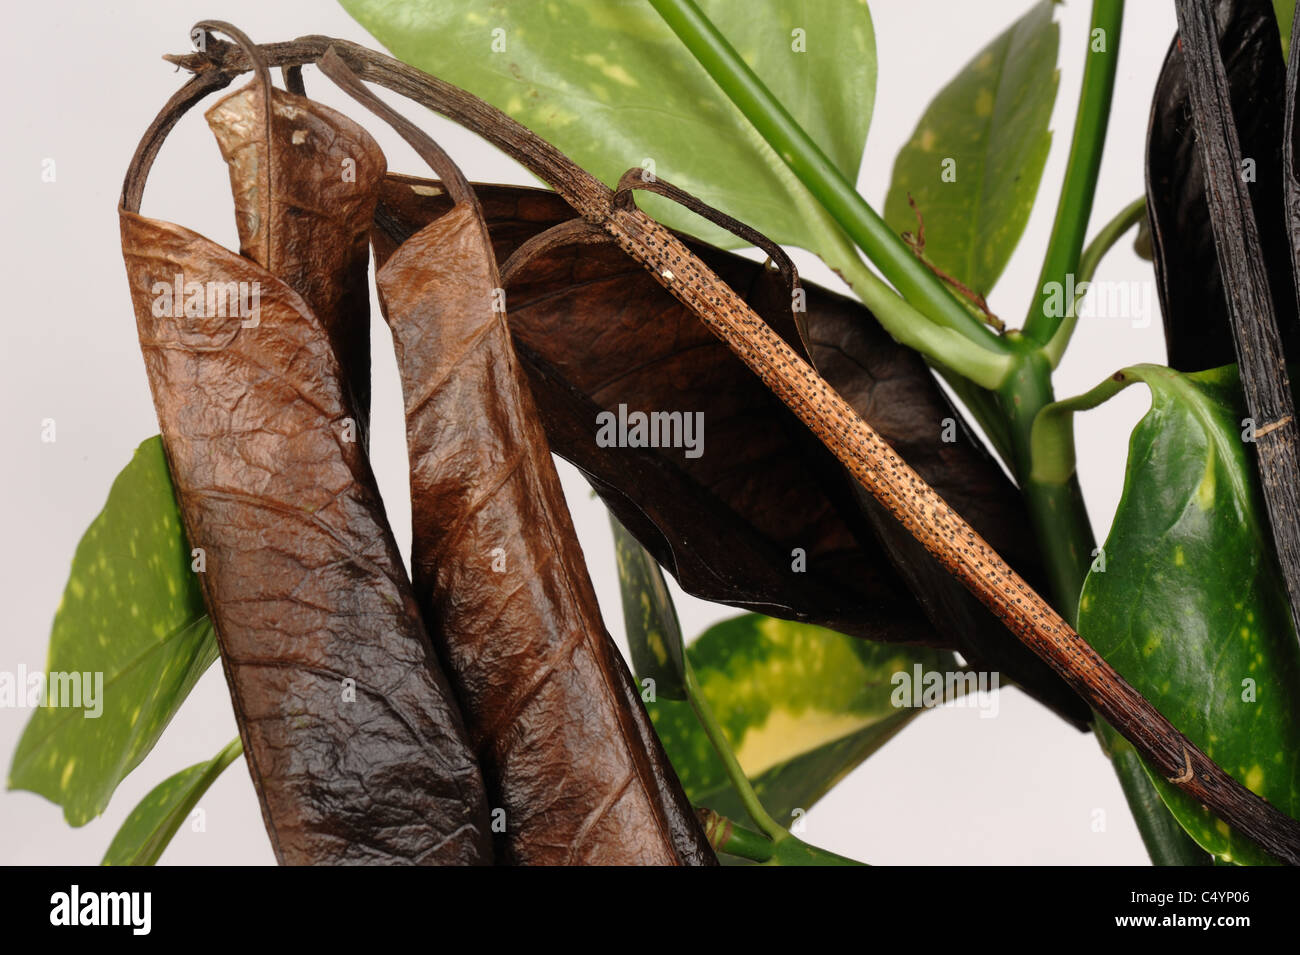 Dieback damage, lesion and fruiting bodies on Aucuba japonica leaves and stem Stock Photo